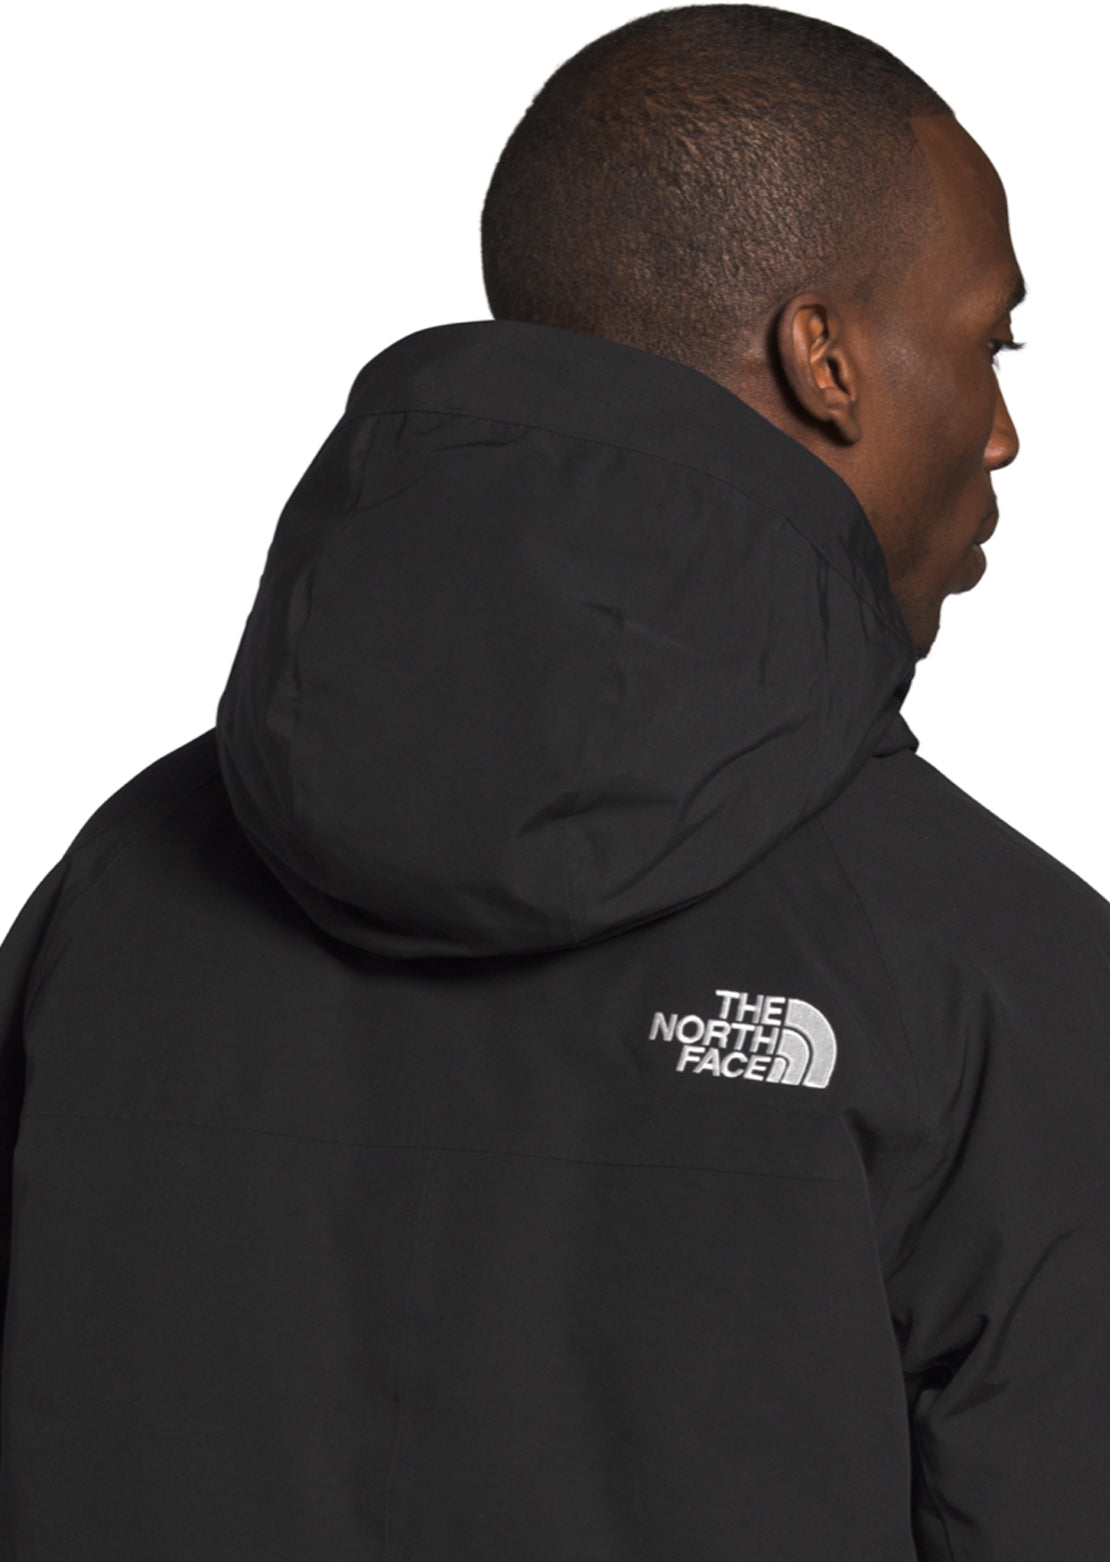 The North Face Men's New Outer Boroughs Parka Jacket PRFO Sports